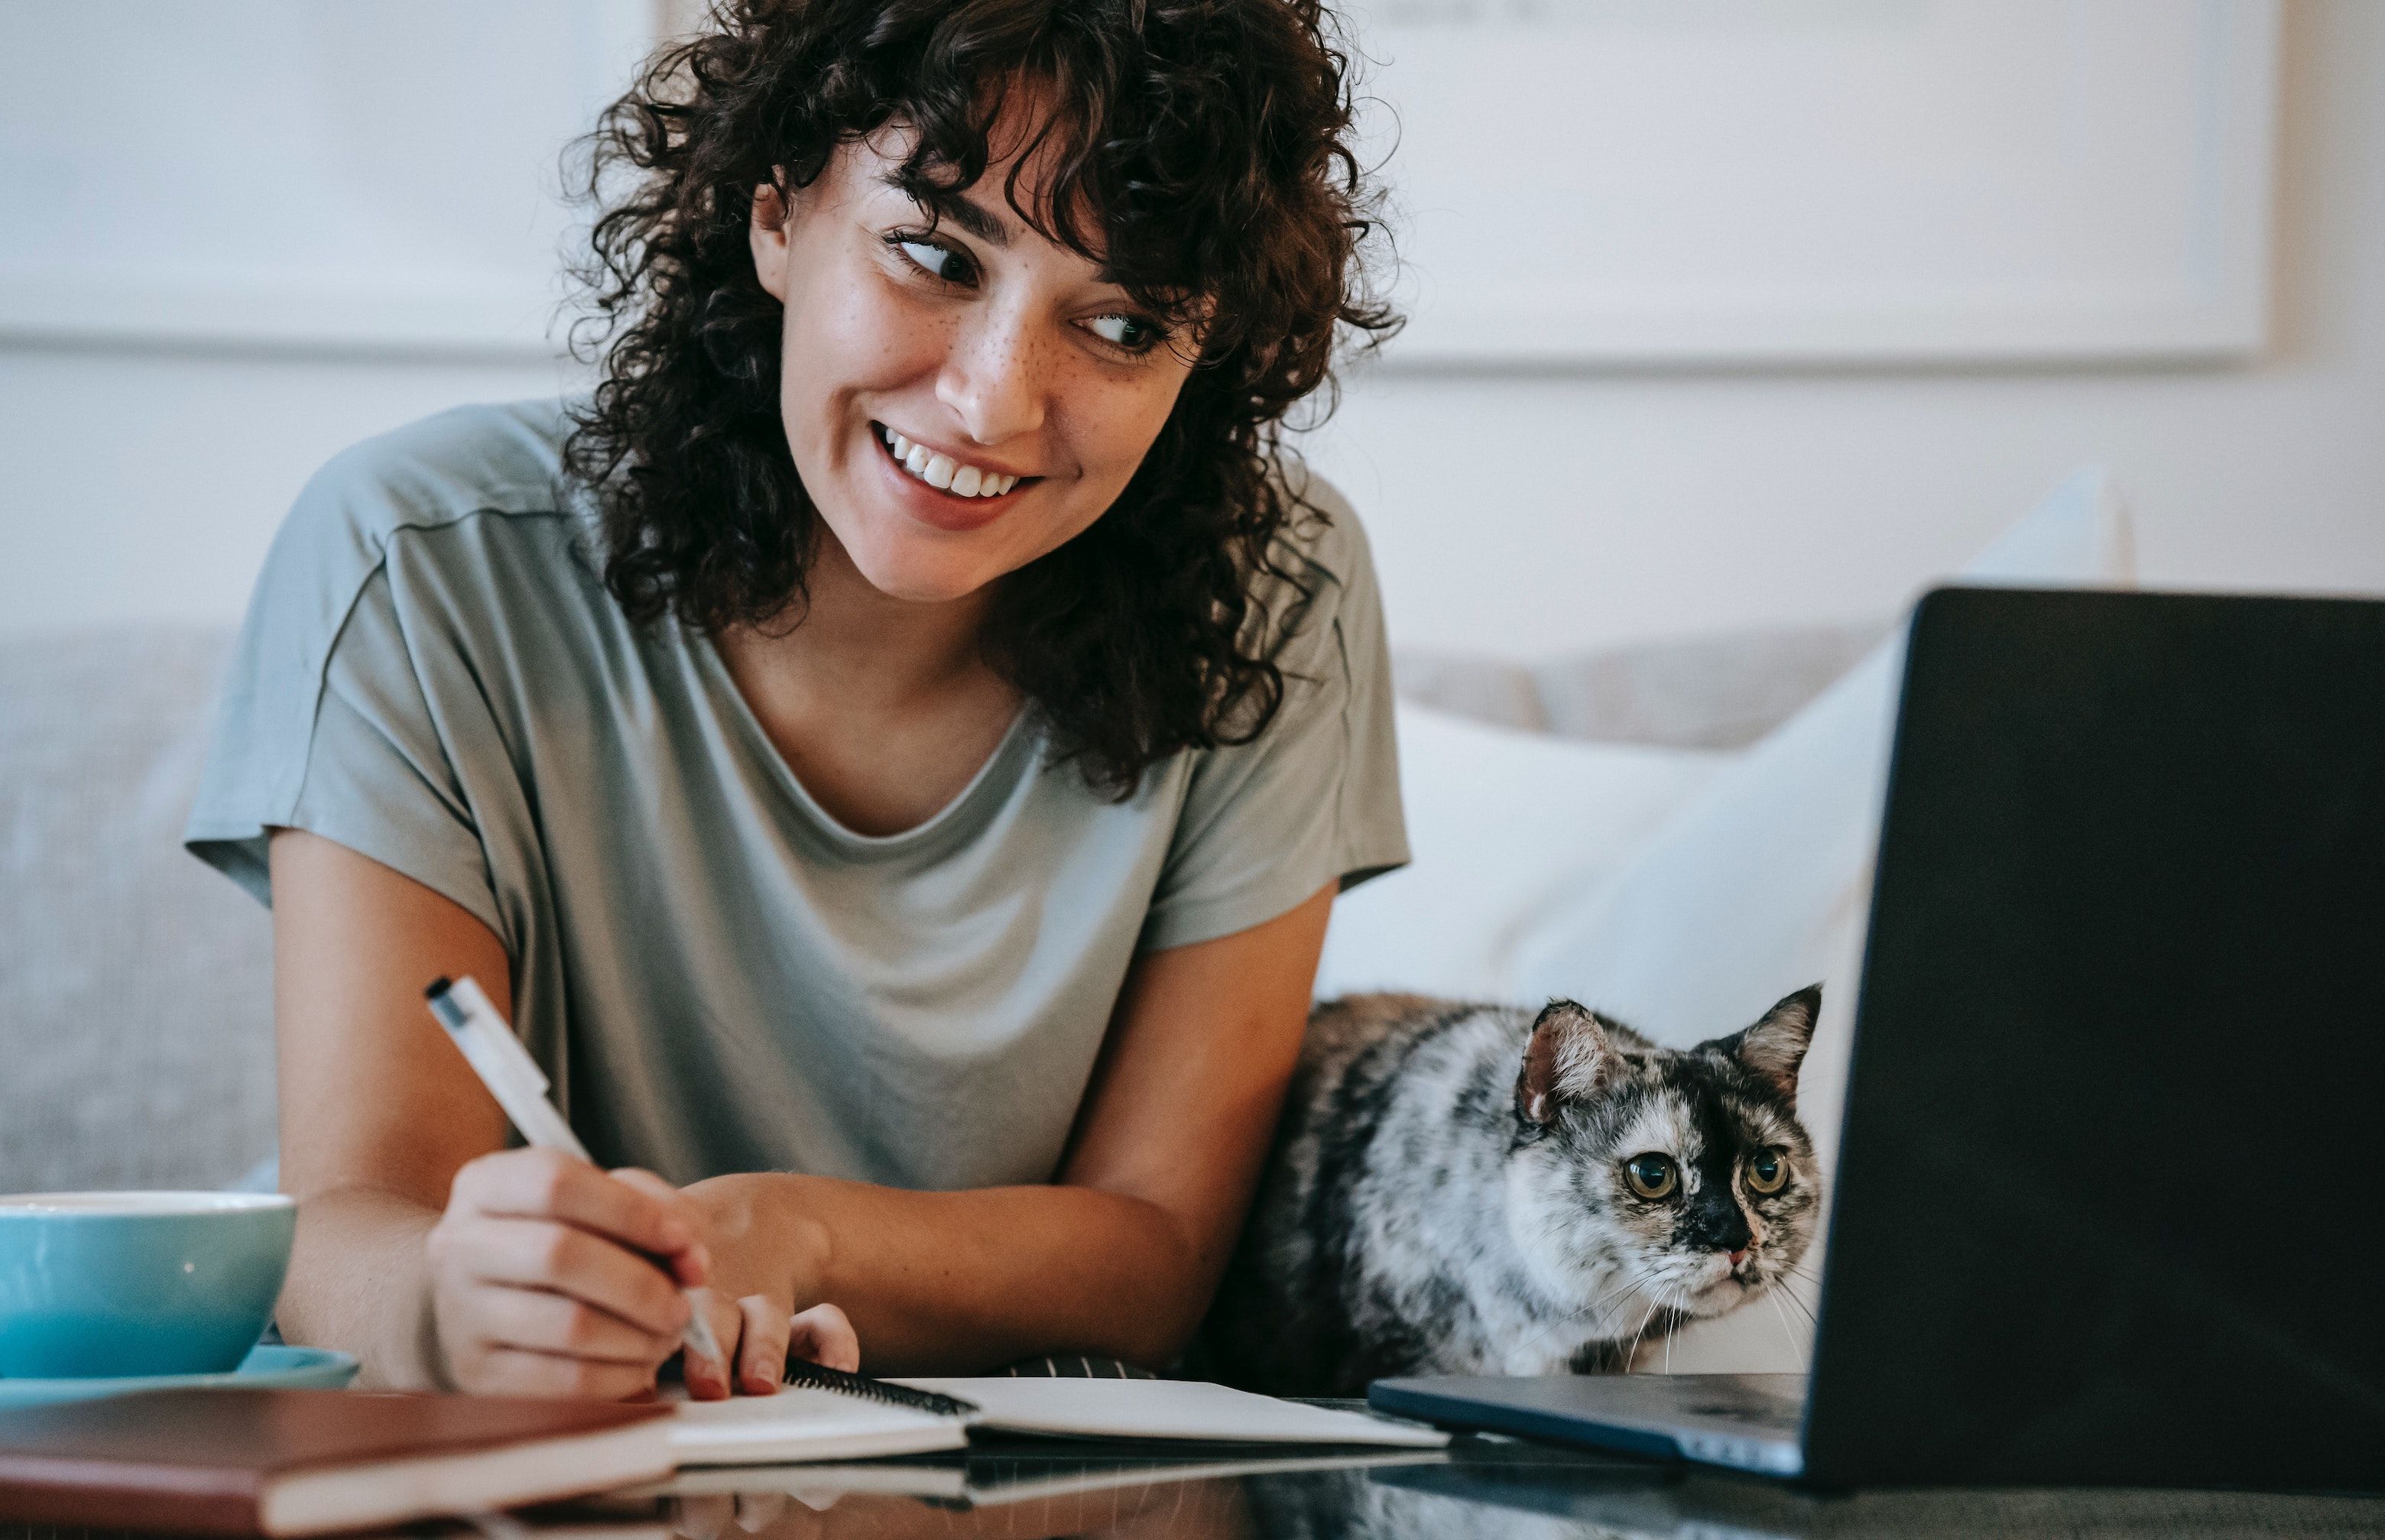 Smiling woman with curly hair in gray shirt writes in a notebook, laptop open on the table and cat by her side